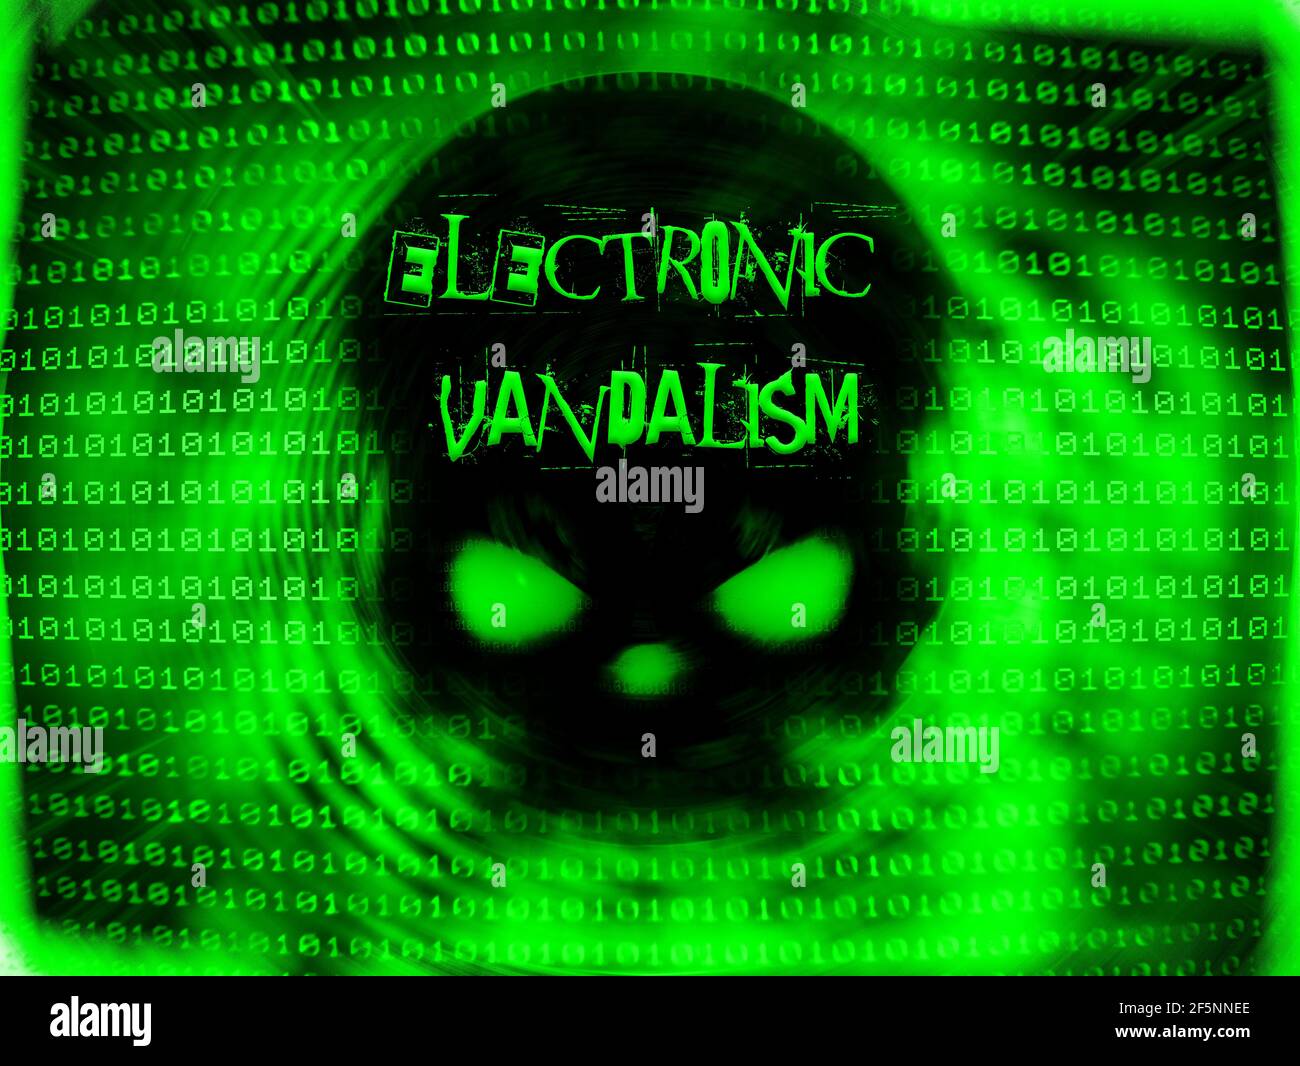 Electronic Vandalism displayed on a pirate skull Stock Photo